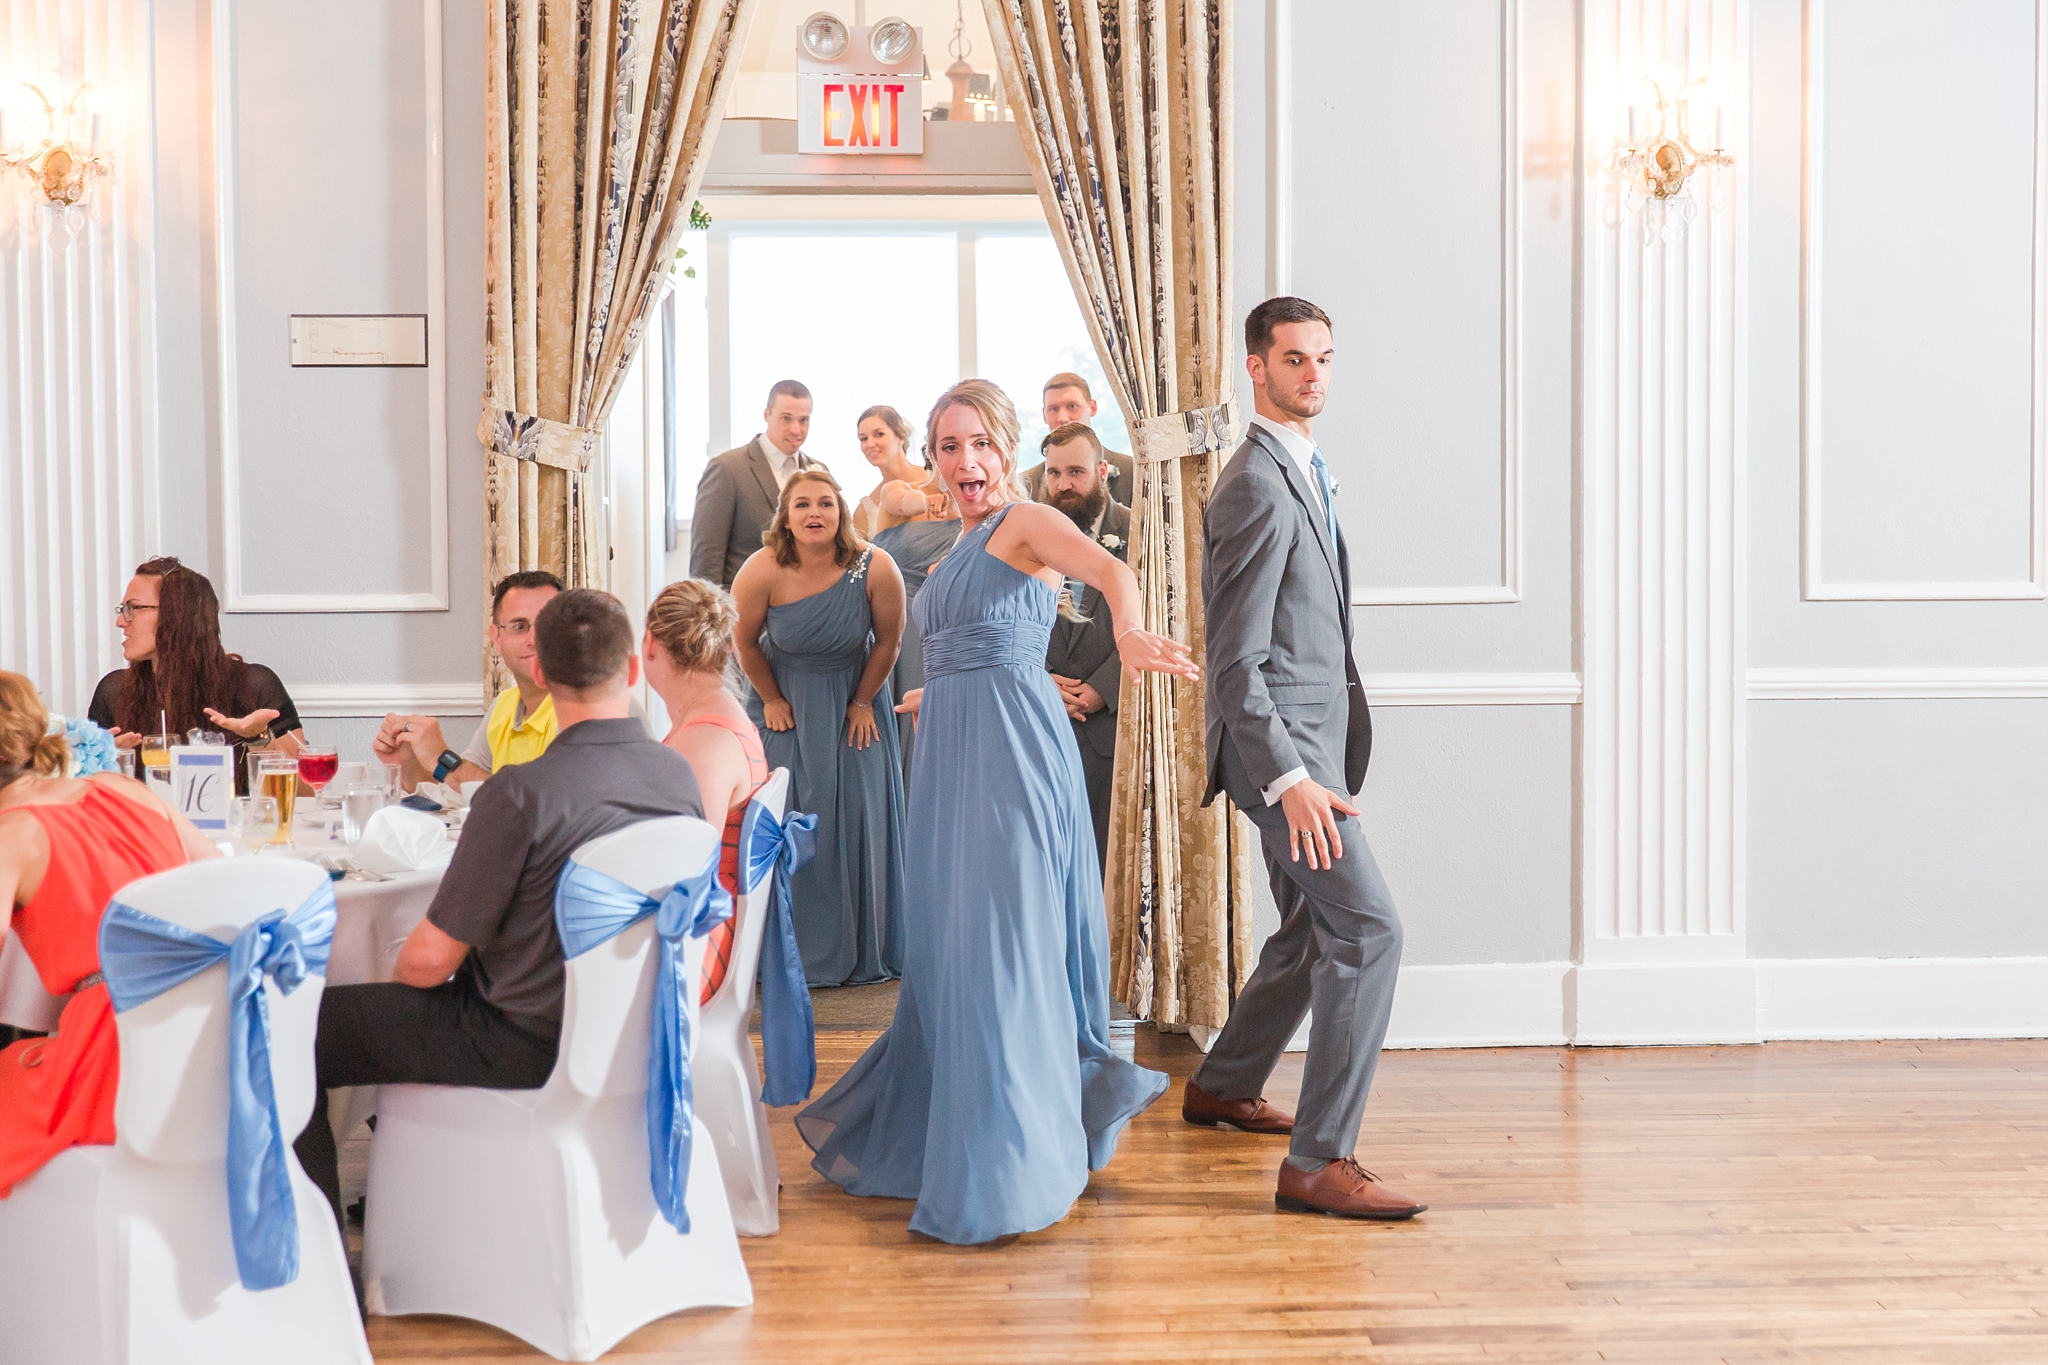 classic-intimate-fun-wedding-photos-at-the-meeting-house-grand-ballroom-in-plymouth-michigan-by-courtney-carolyn-photography_0071.jpg